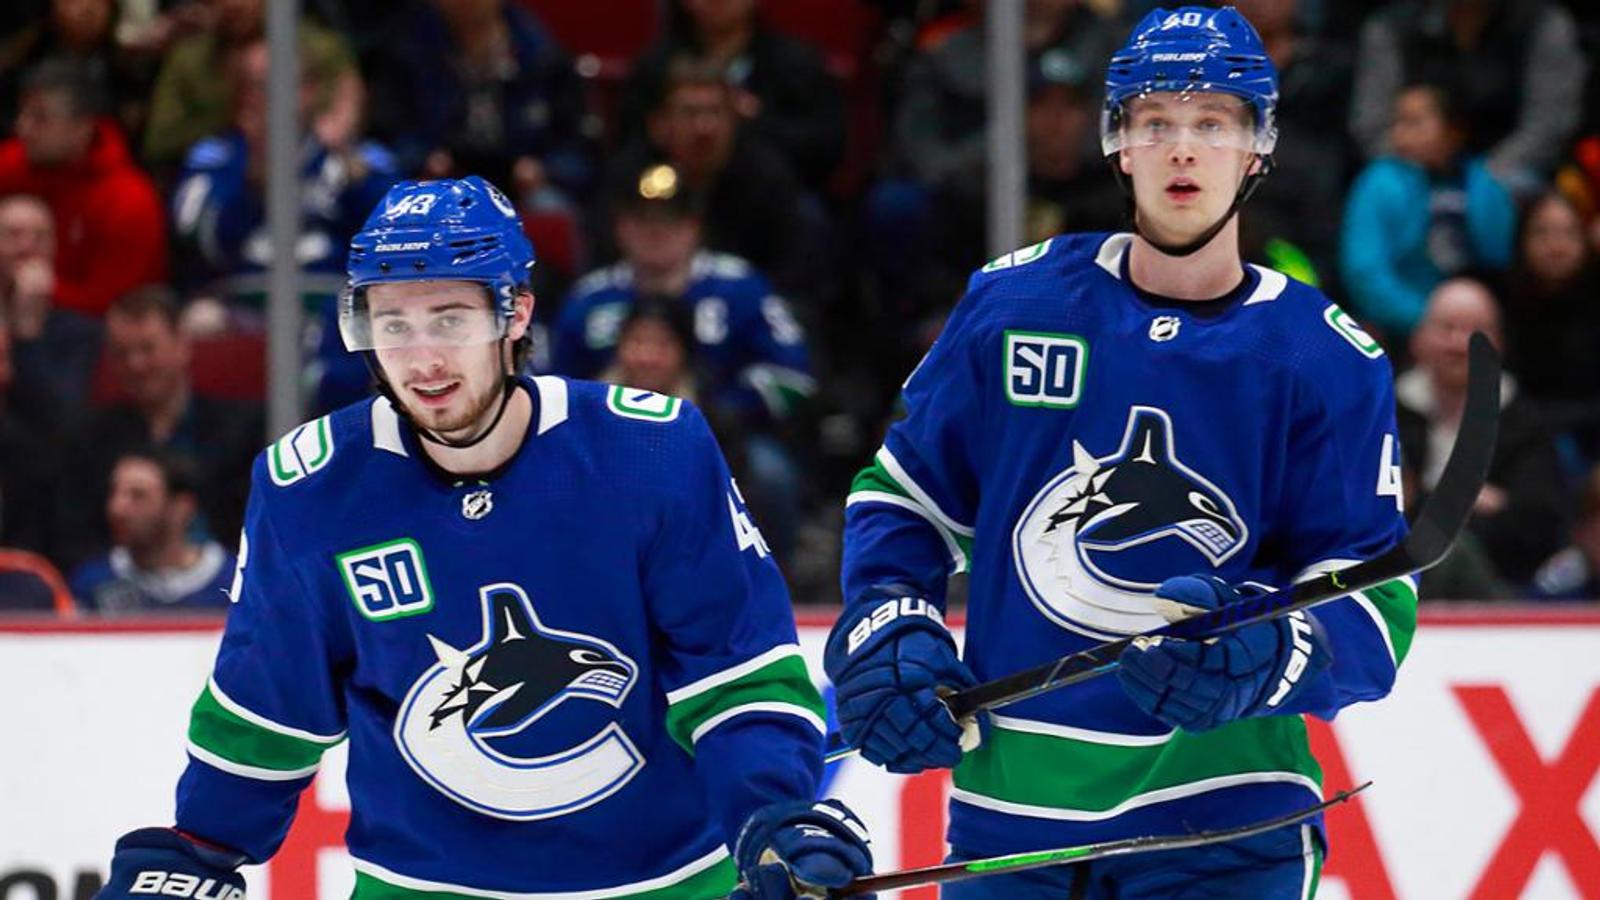 “High level of concern” for Pettersson and Hughes in Vancouver 